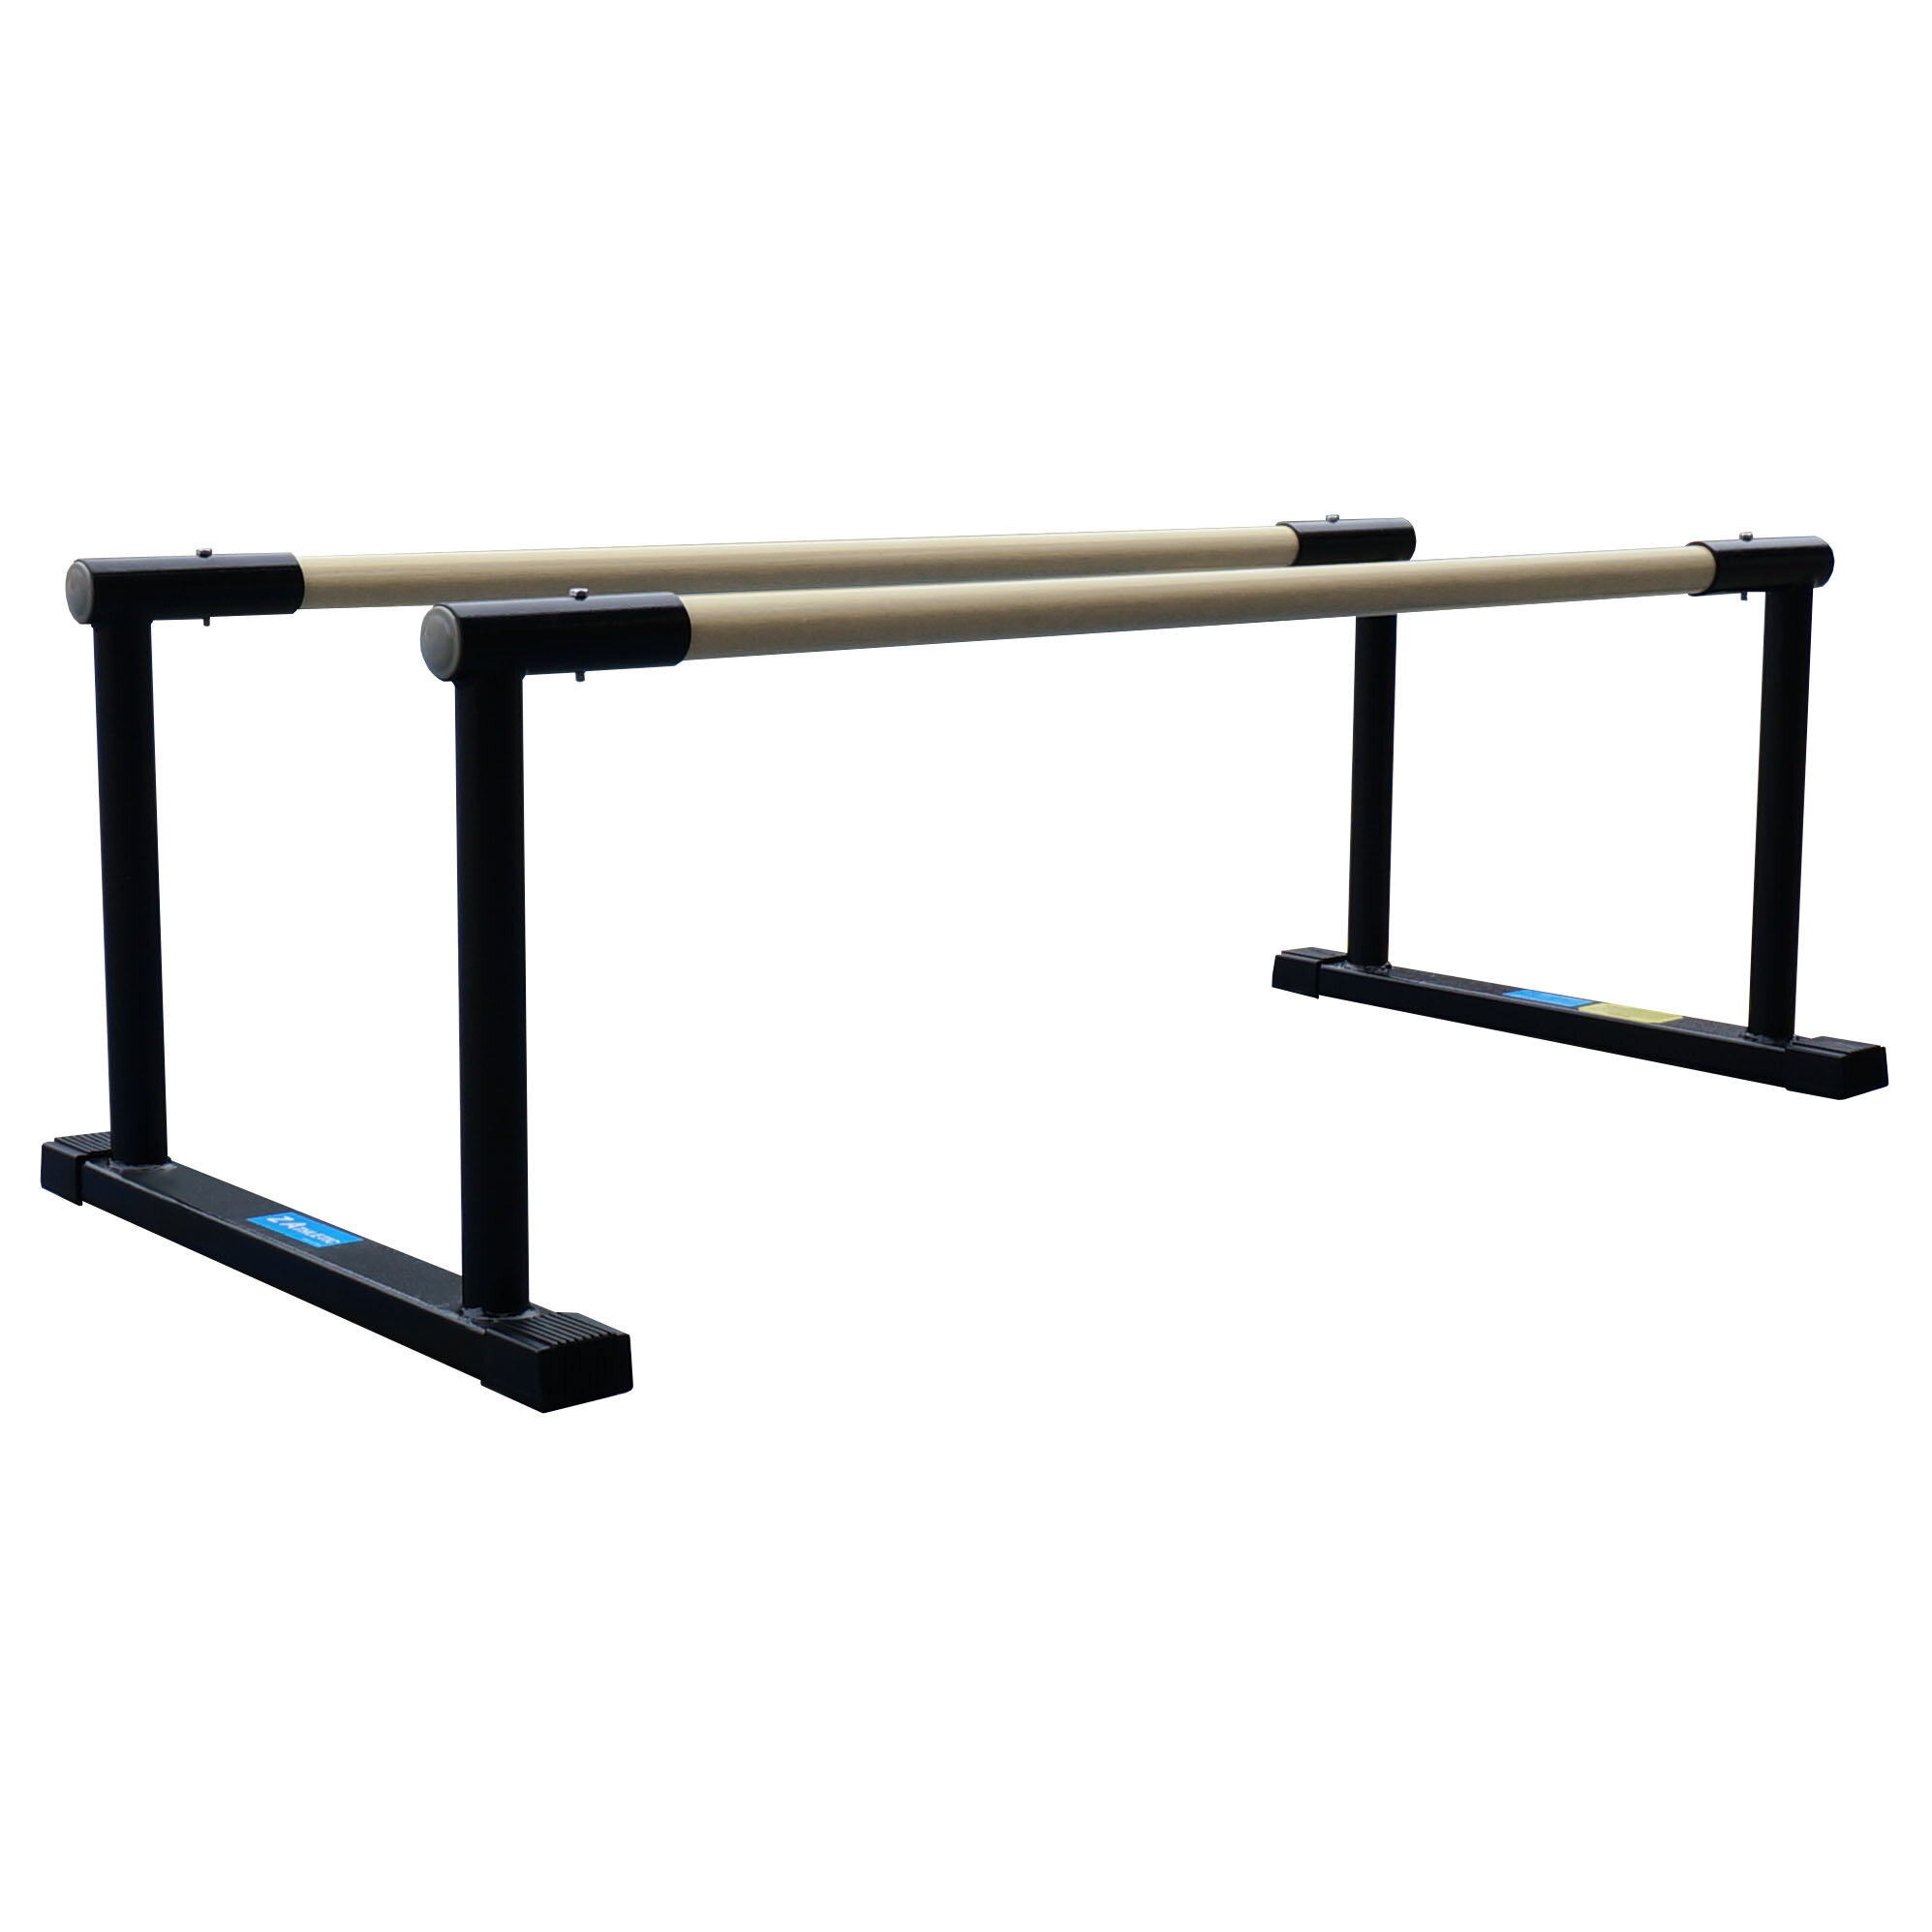 Multiple Sizes Z Athletic Gymnastics Competition Uneven bar Rail with Attachments